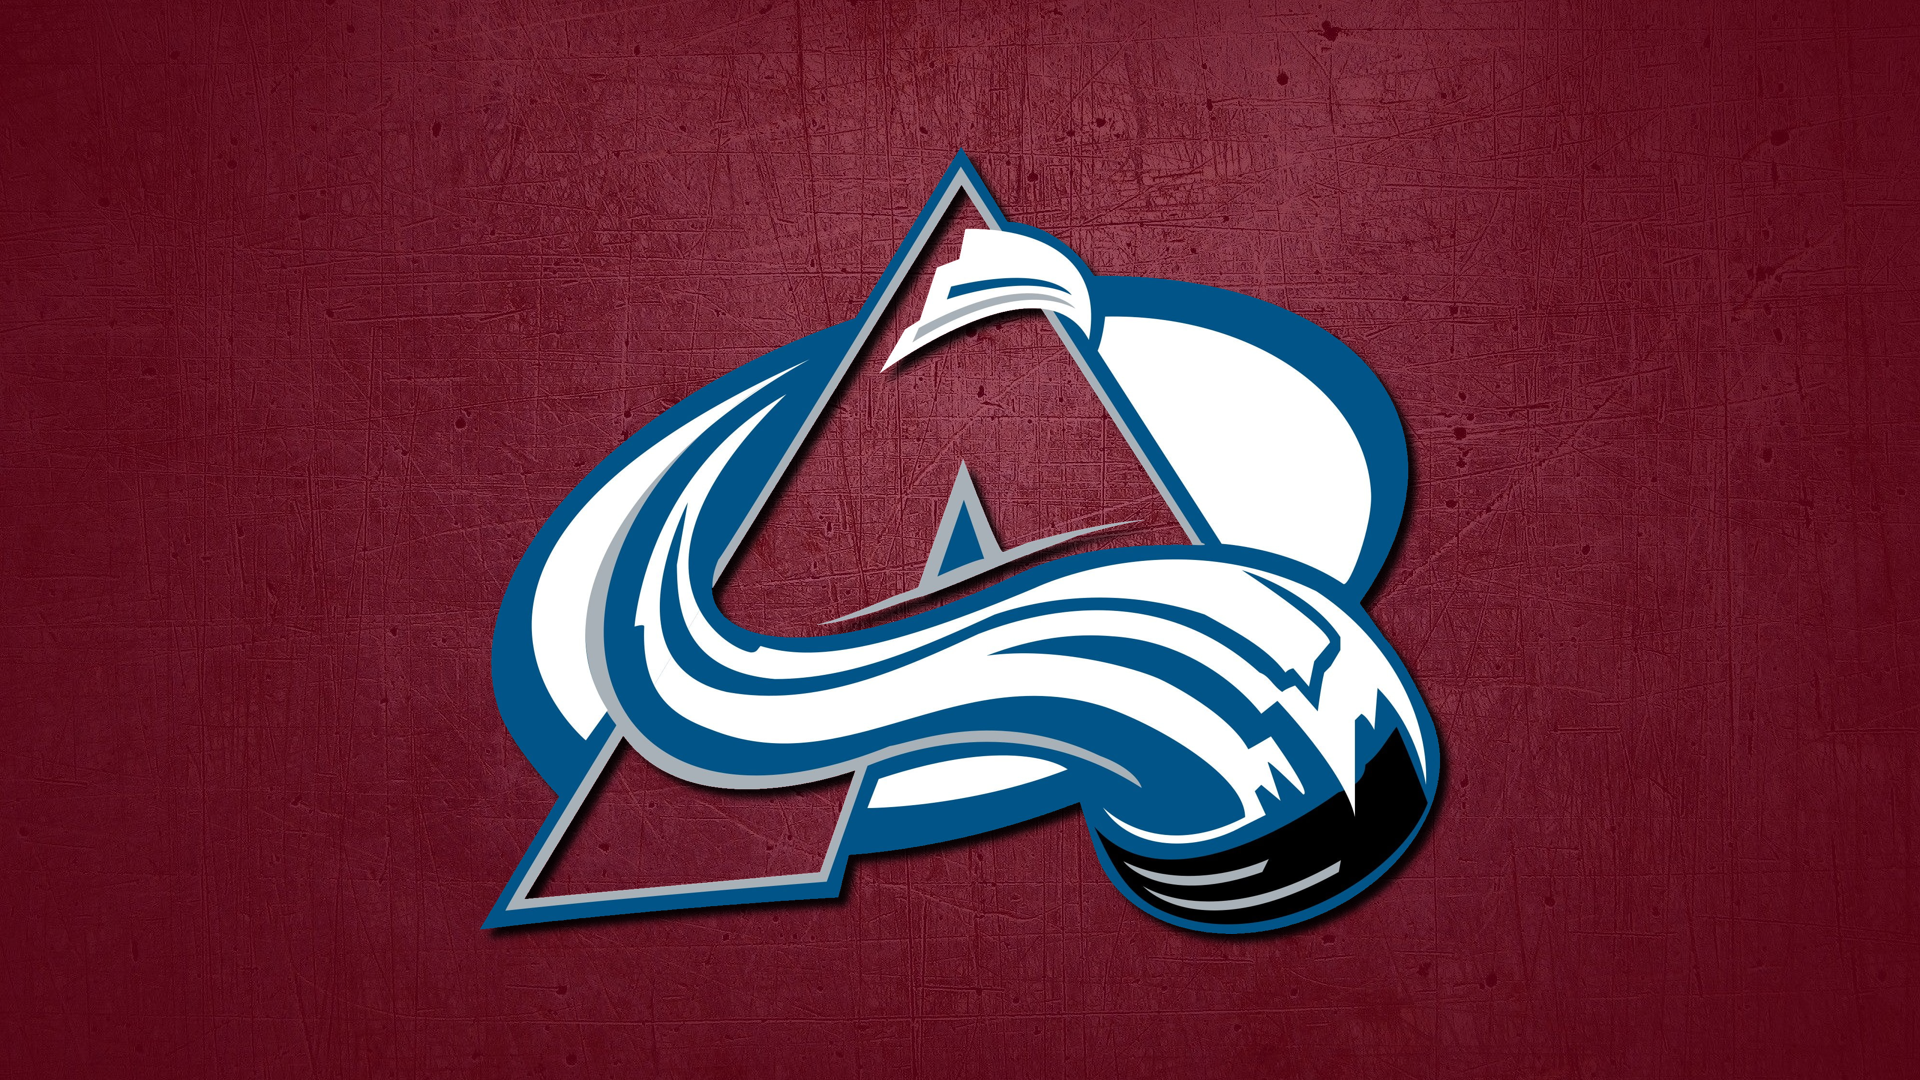 General 1920x1080 Colorado Avalanche NHL hockey logo simple background red background